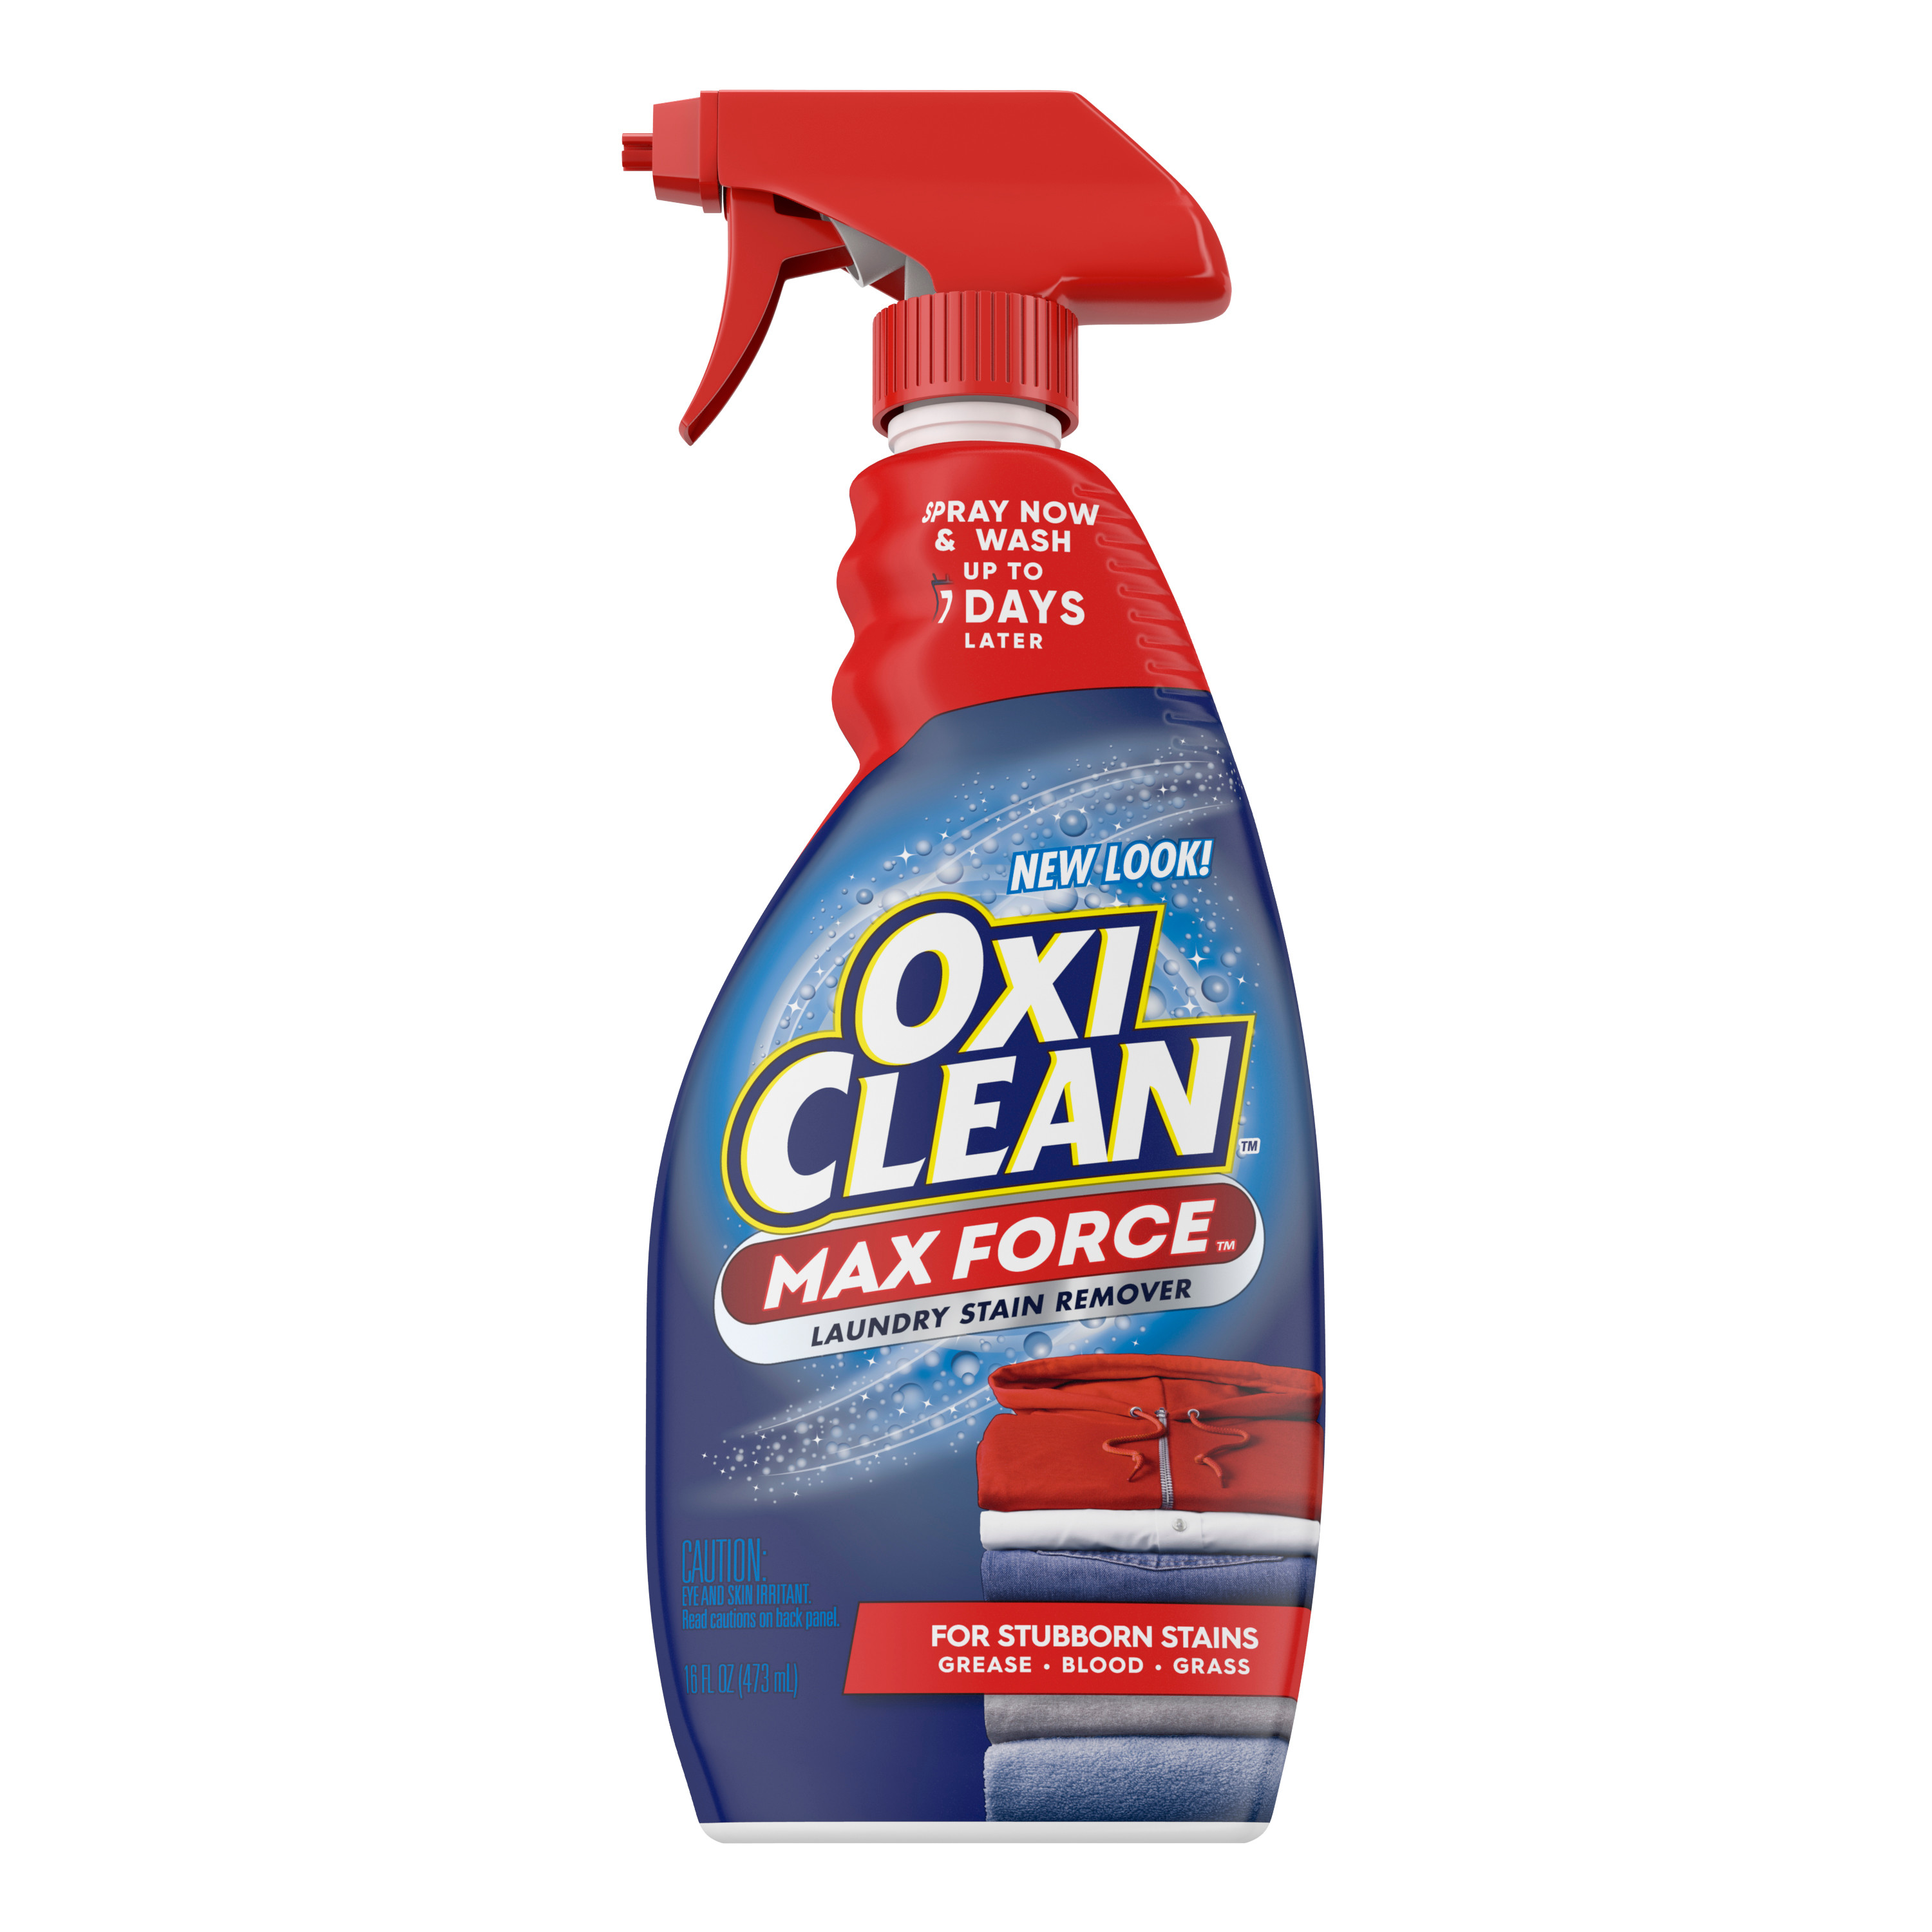 OxiClean Max Force Laundry Stain Remover Spray, 16 fl oz - image 1 of 10